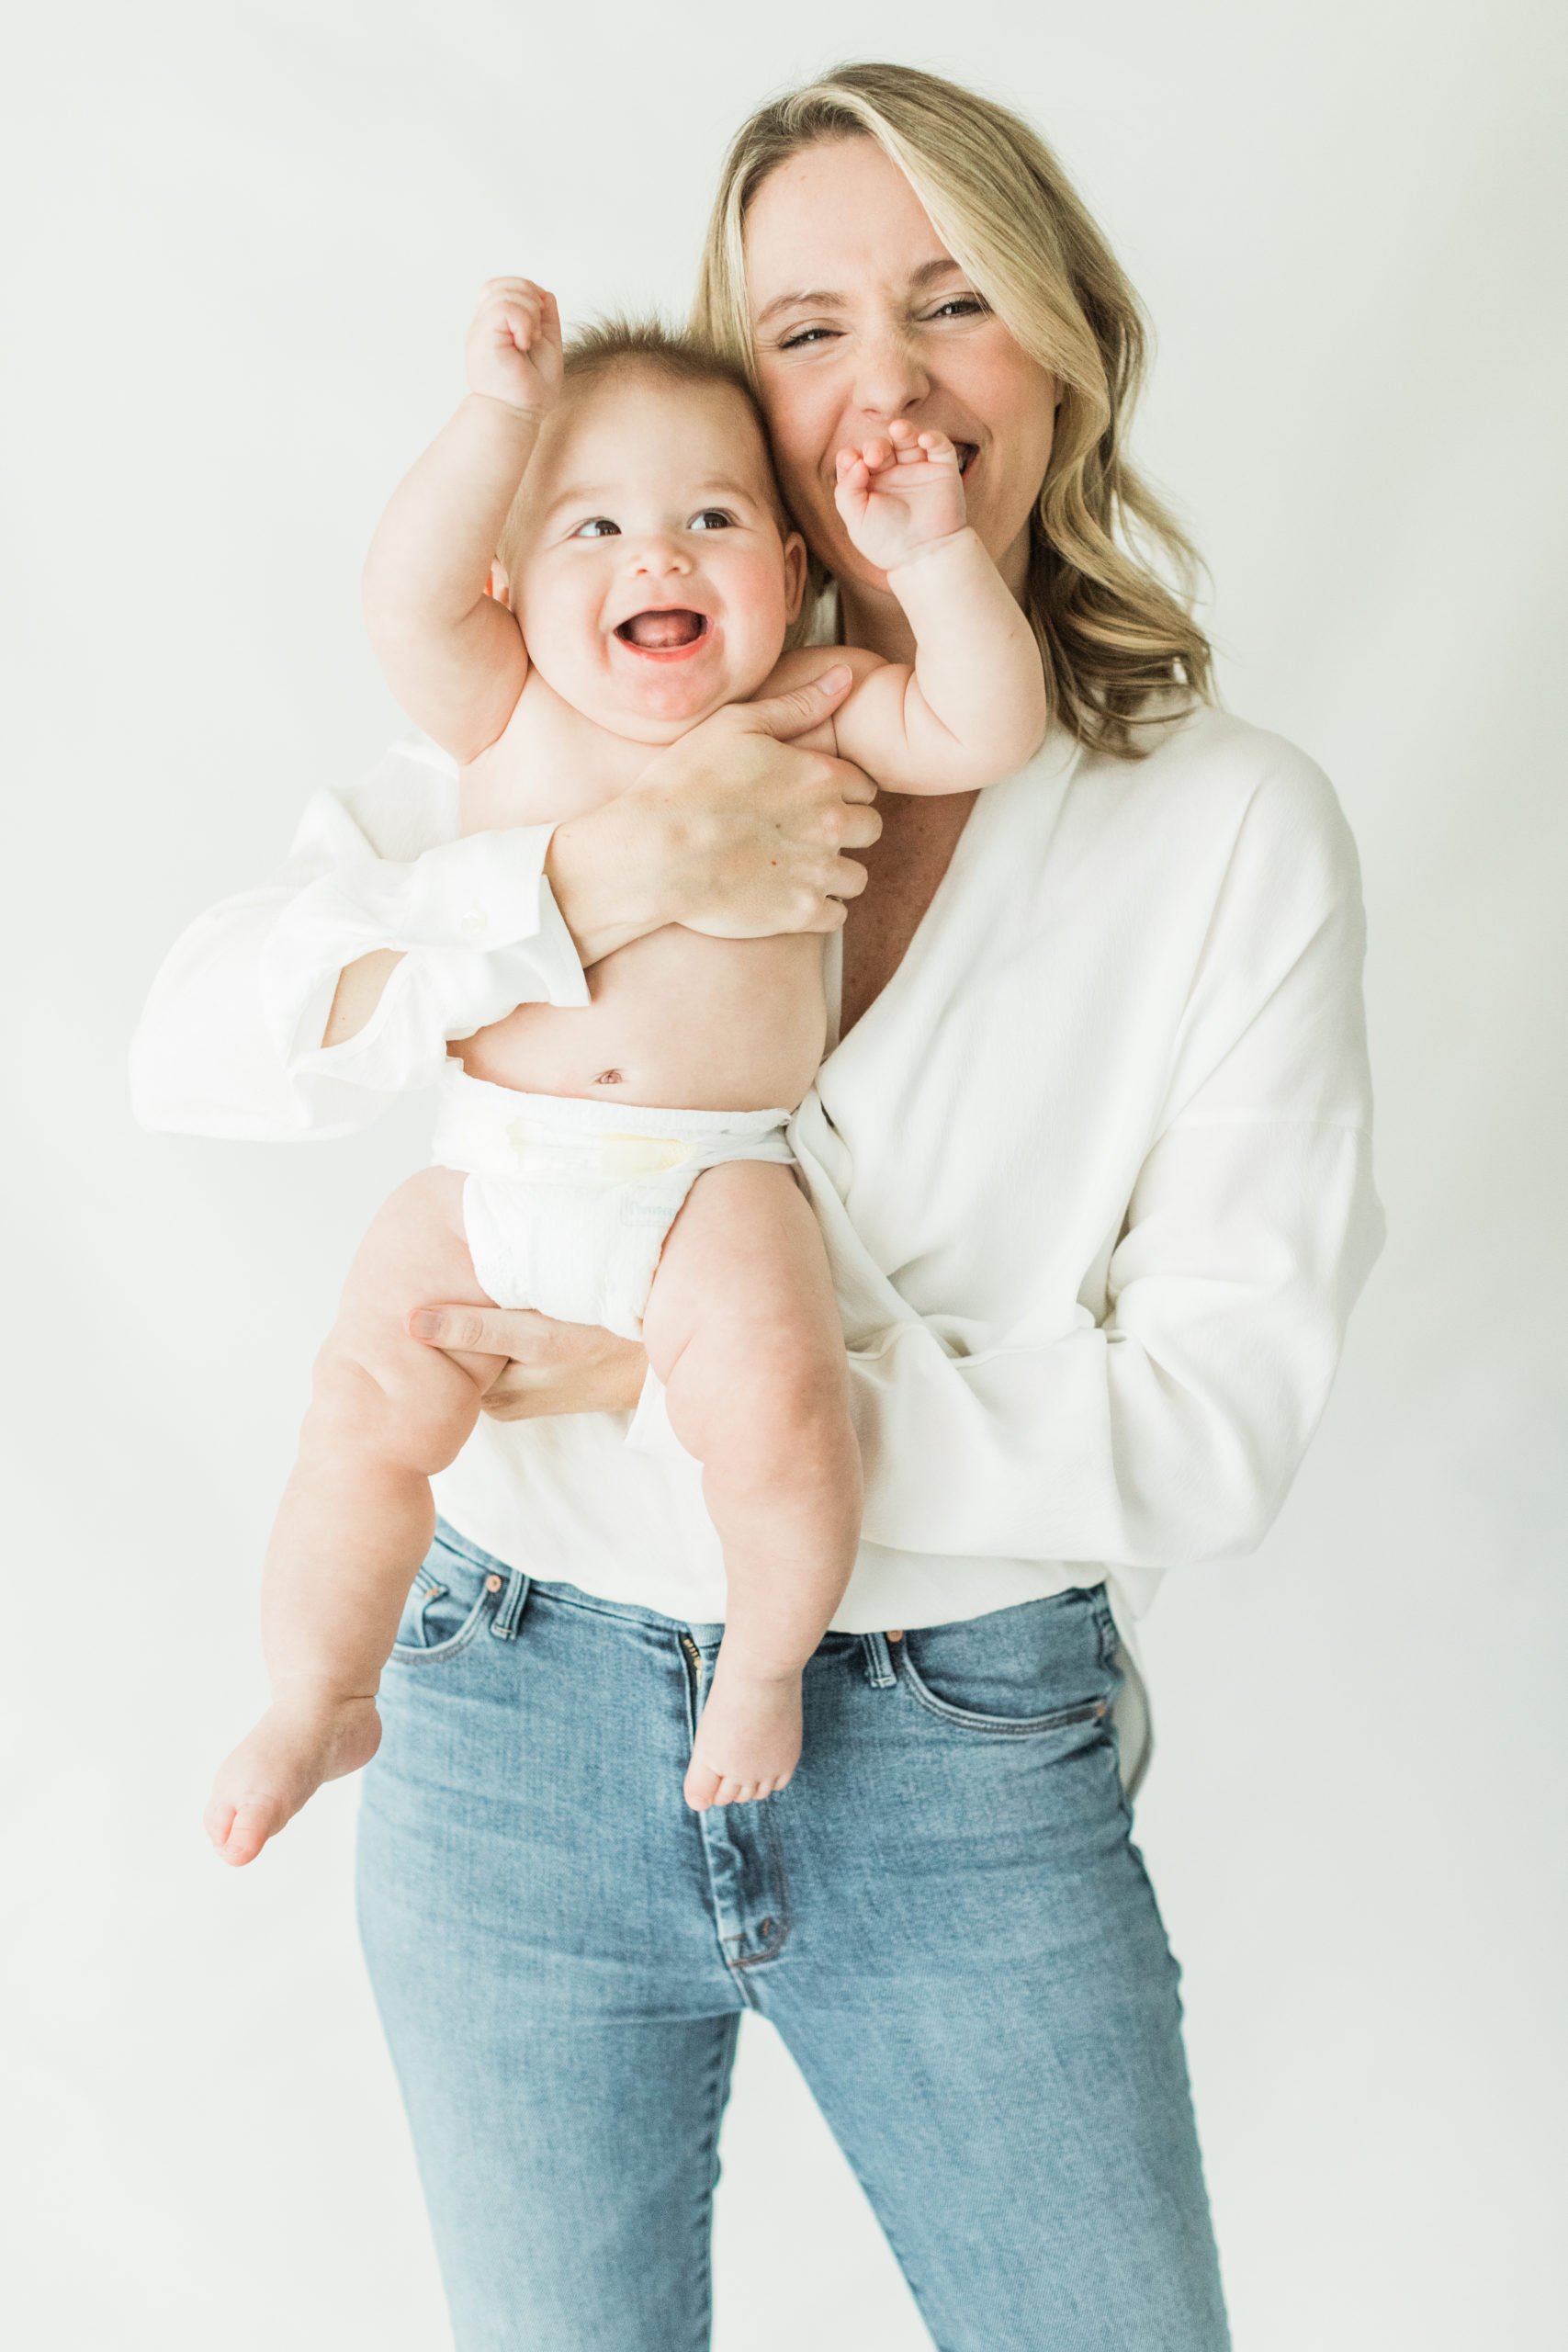 Mom holding her 6 month old baby boy. Baby boy in diaper, smiling. Mama in white long sleeve shirt and blue jeans. Natural light photographer.